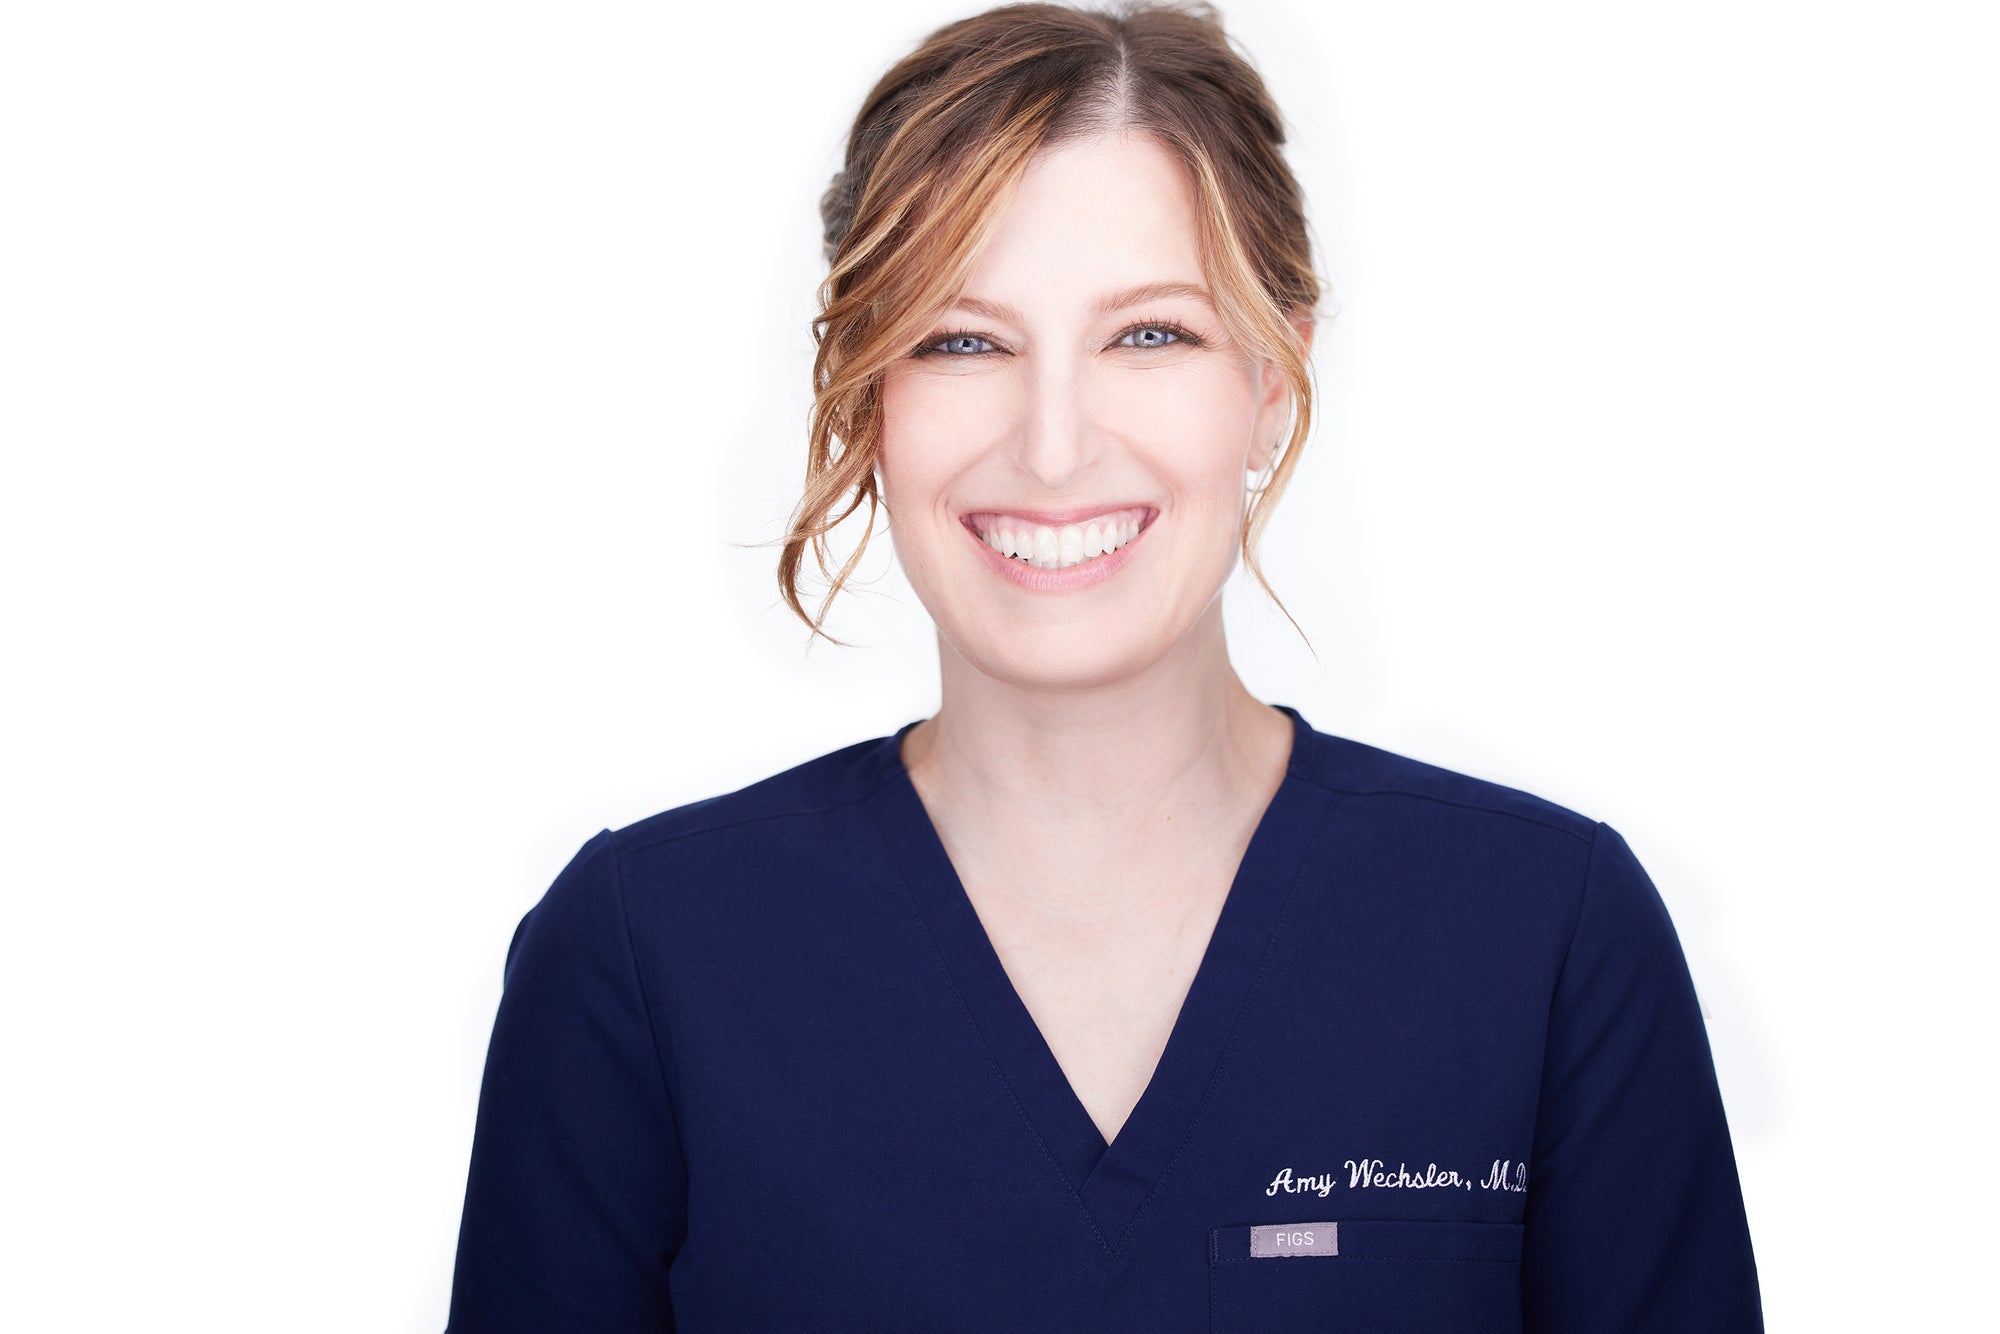 Dr. Amy Wechsler wears navy blue scrubs. Her hair is tied back and a two wispy bang fall down on either side of her face. She smiles.